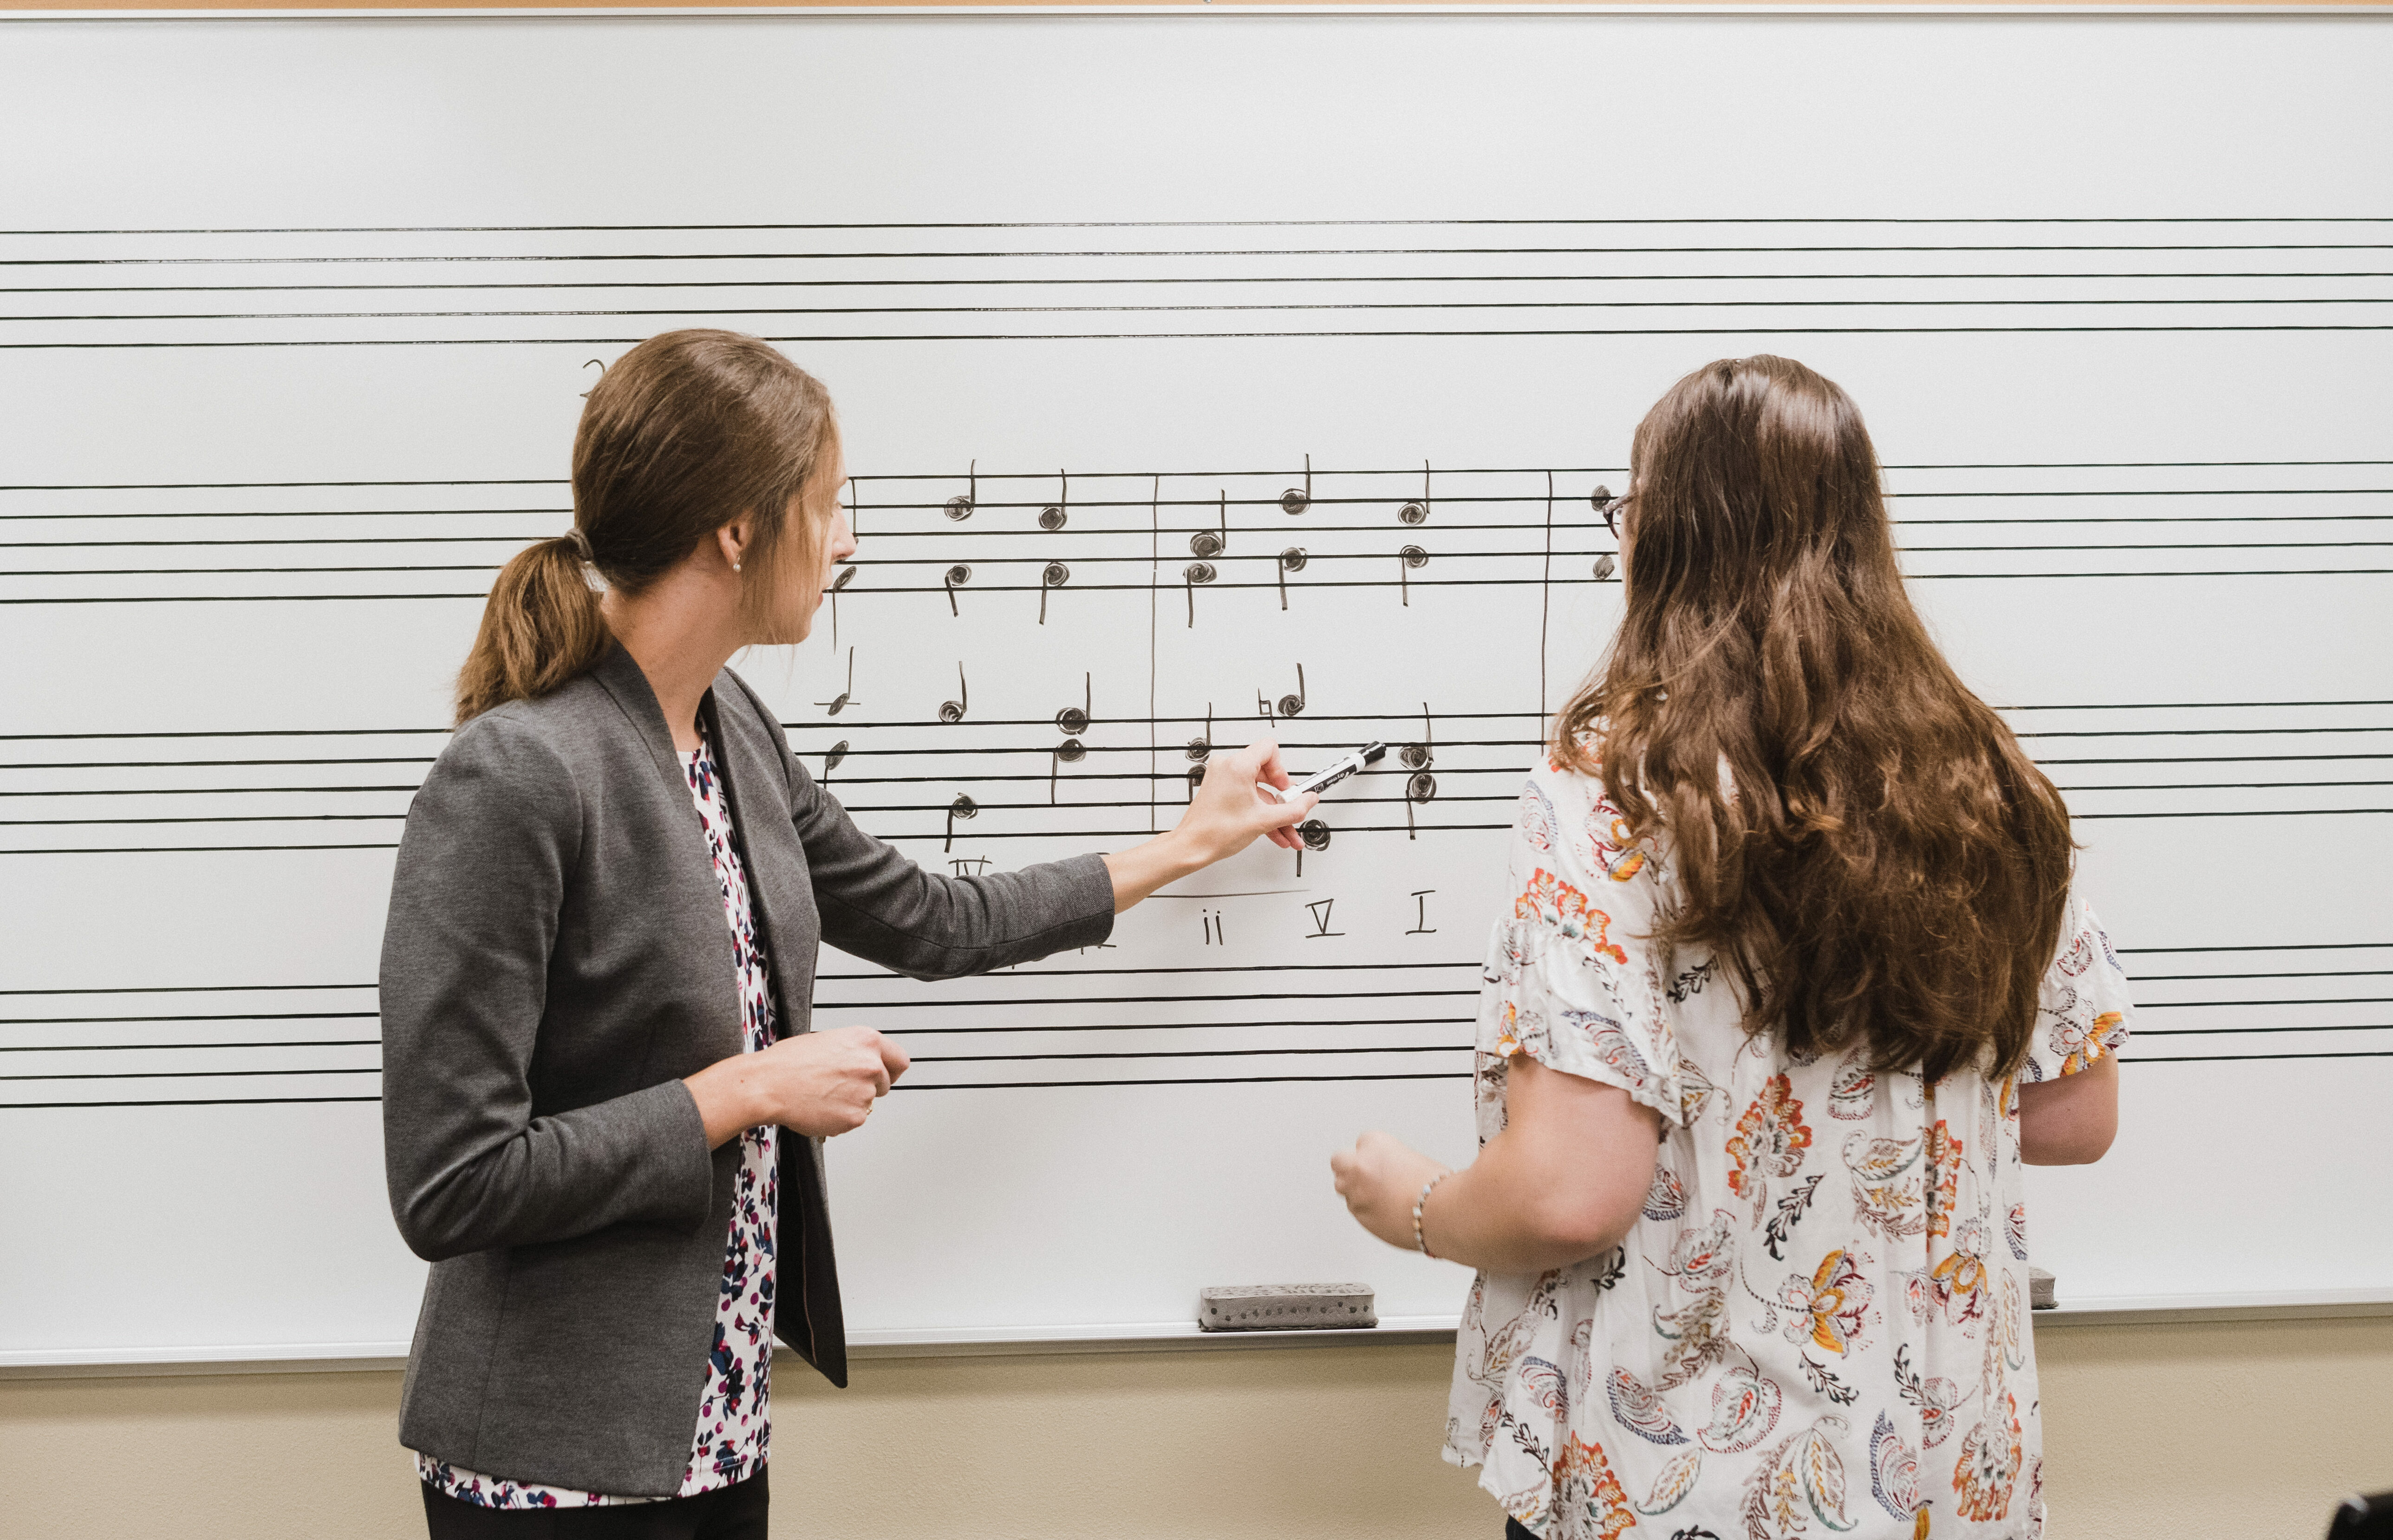 Faculty member and student work out music notes on a whiteboard